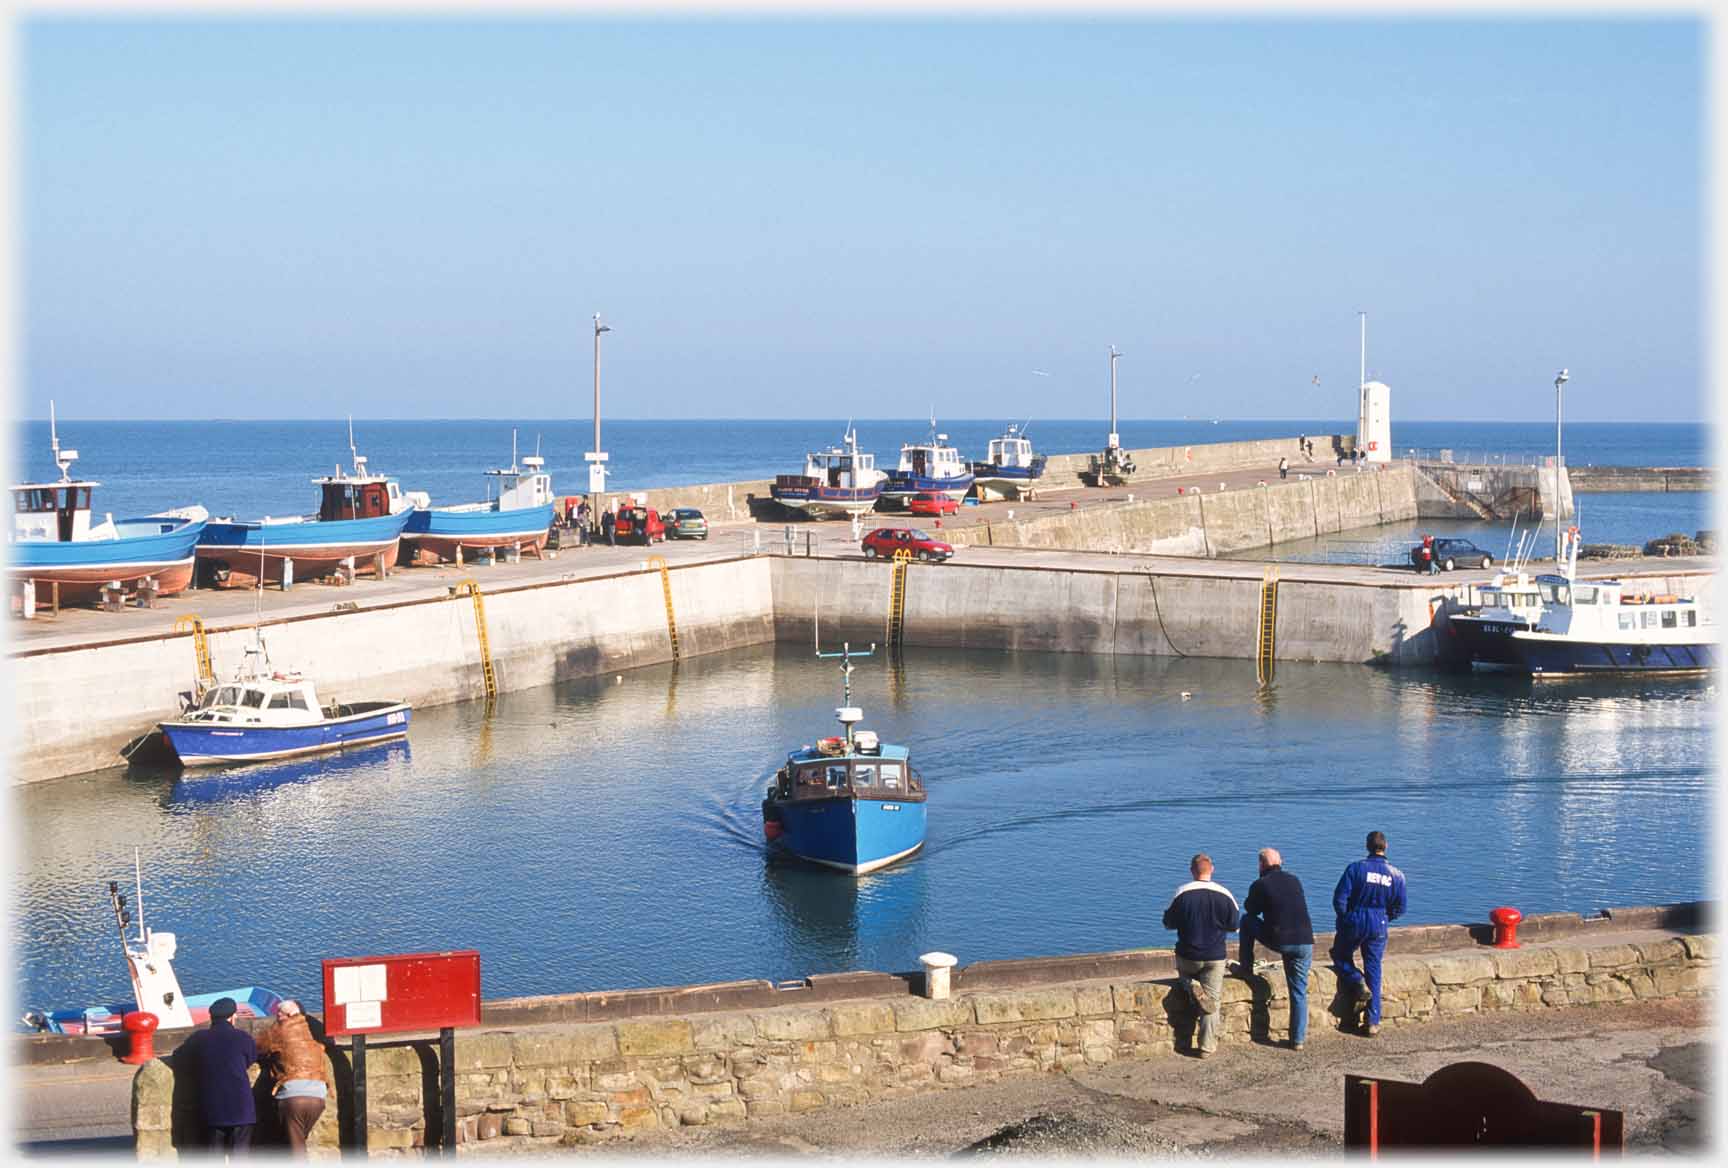 Two groups of men standing by harbour wall watching boat turning.